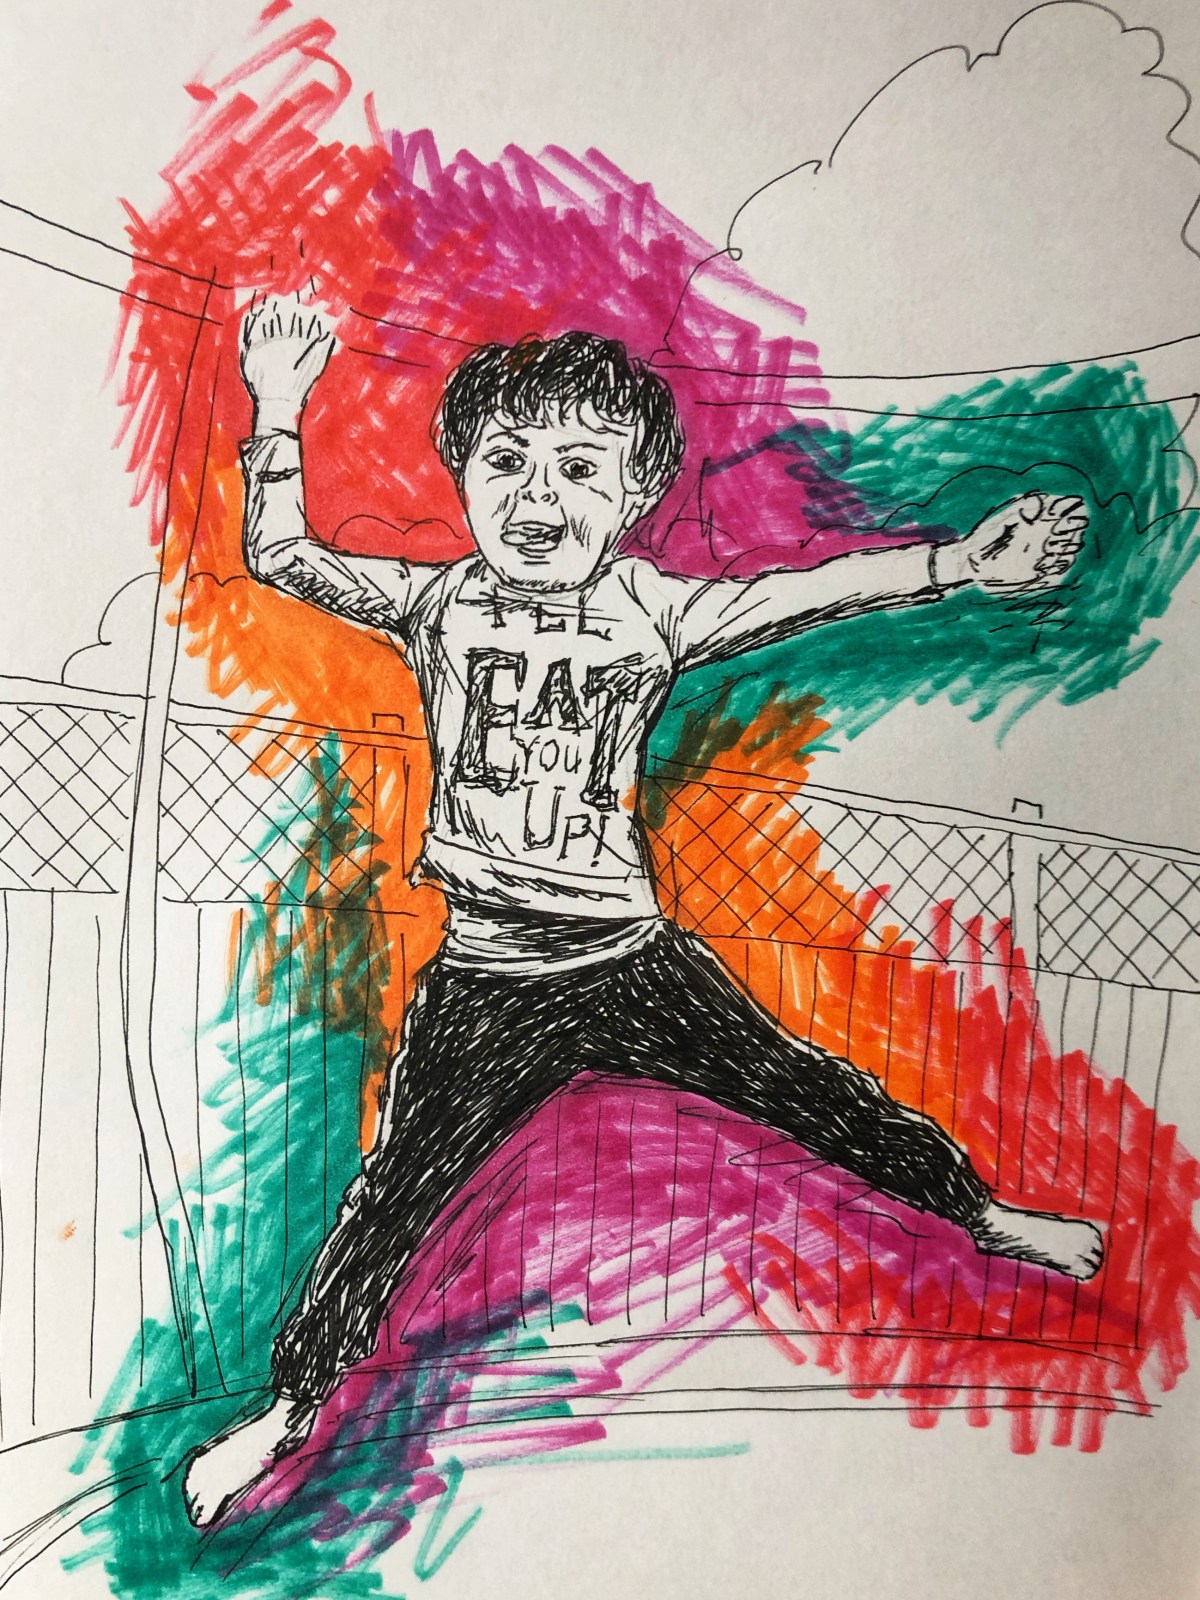 Illustration of boy jumping on trampoline with tongue out.